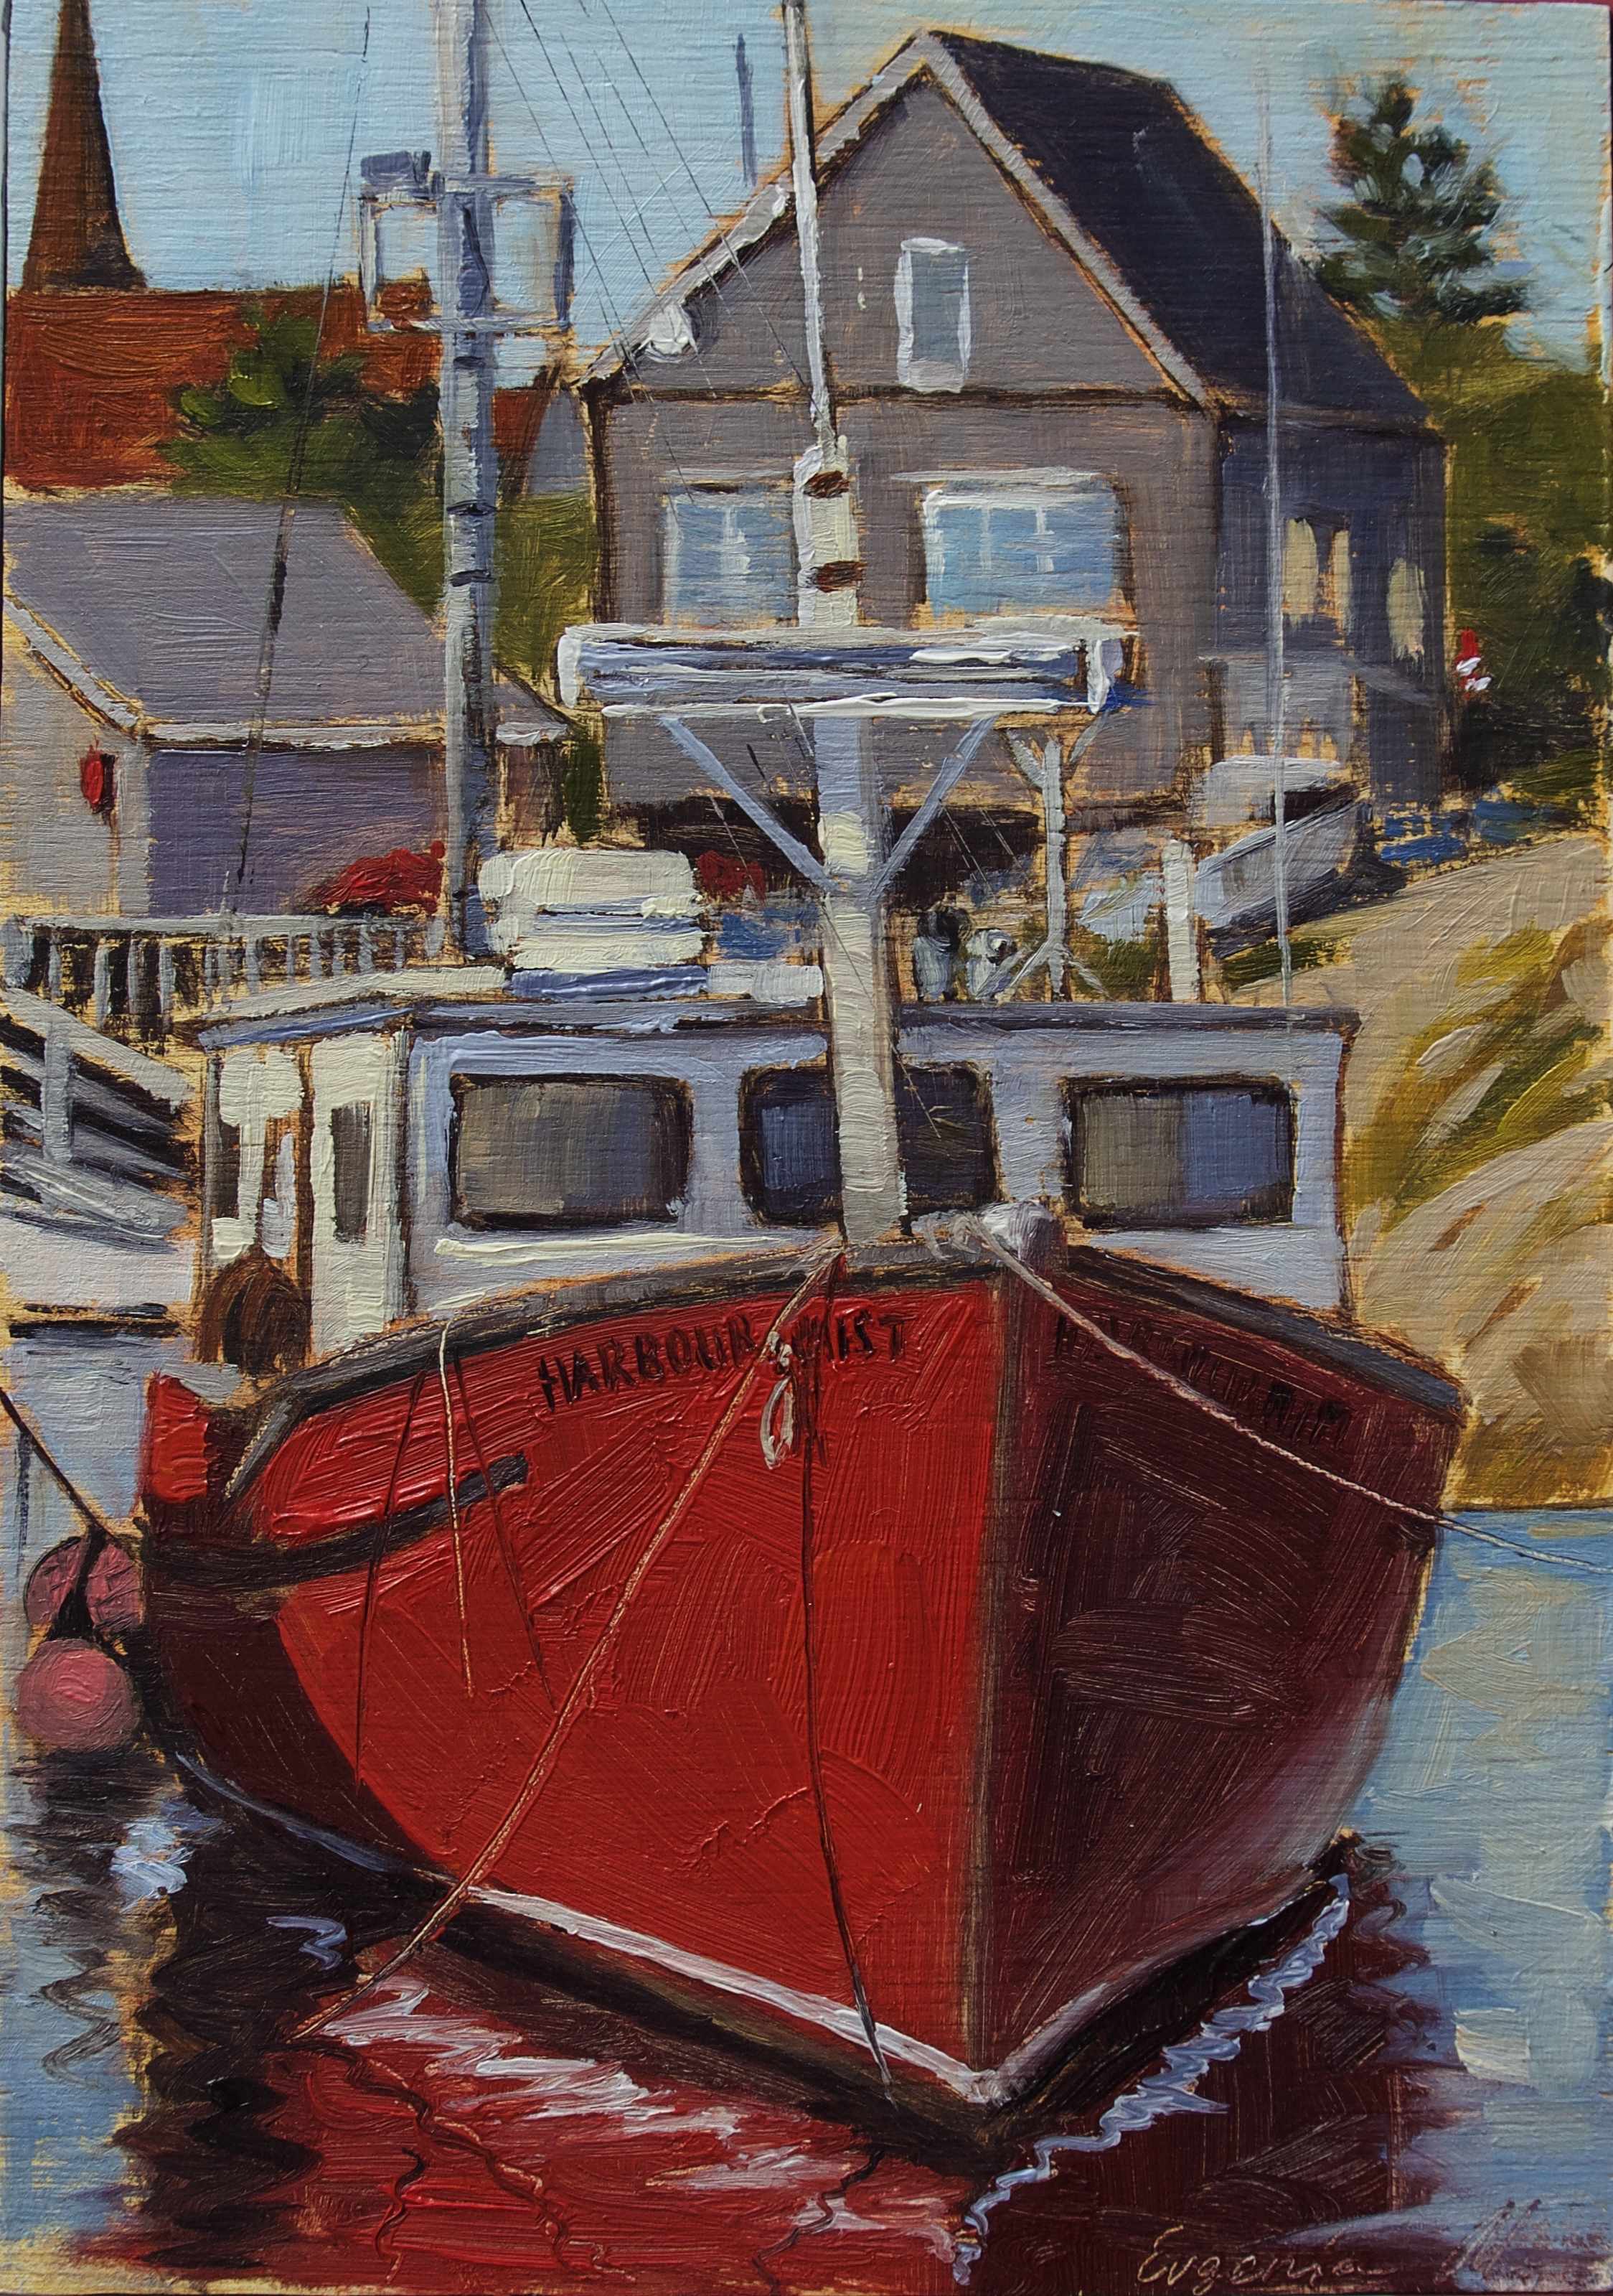 painting of Harbour mist lobster boat in Peggy's cove harbour